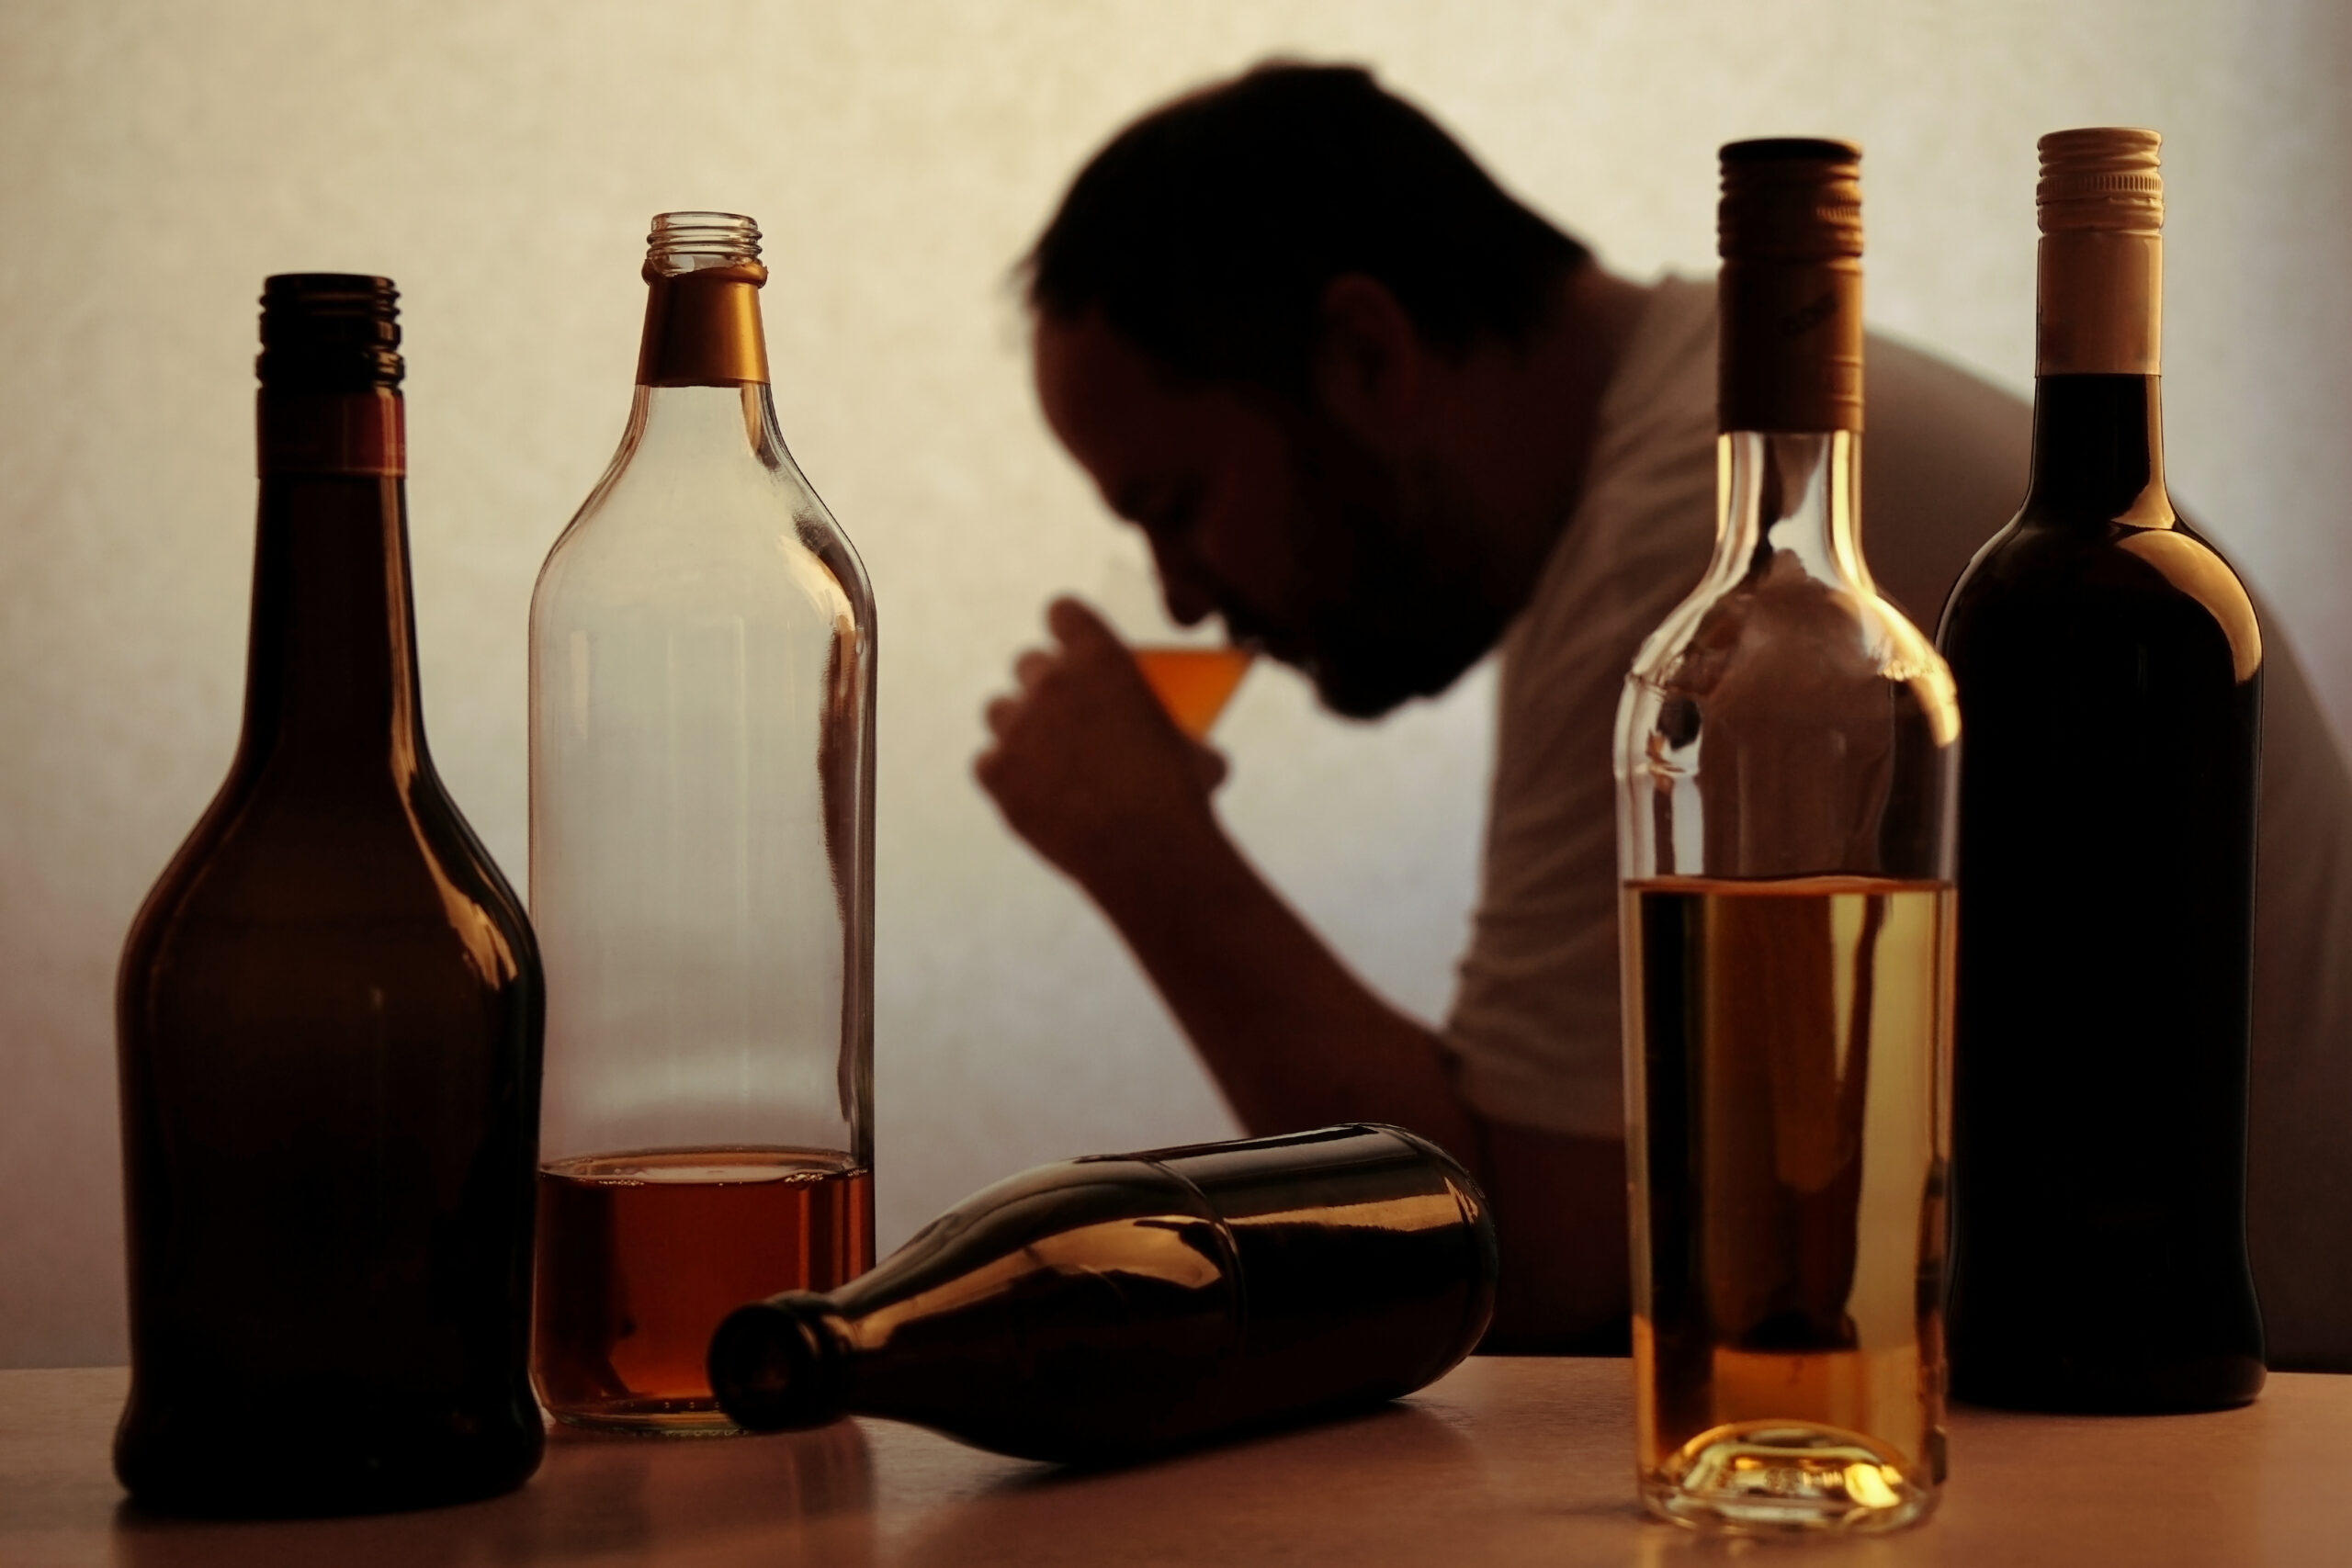 Long-Term Effects of Alcohol Abuse